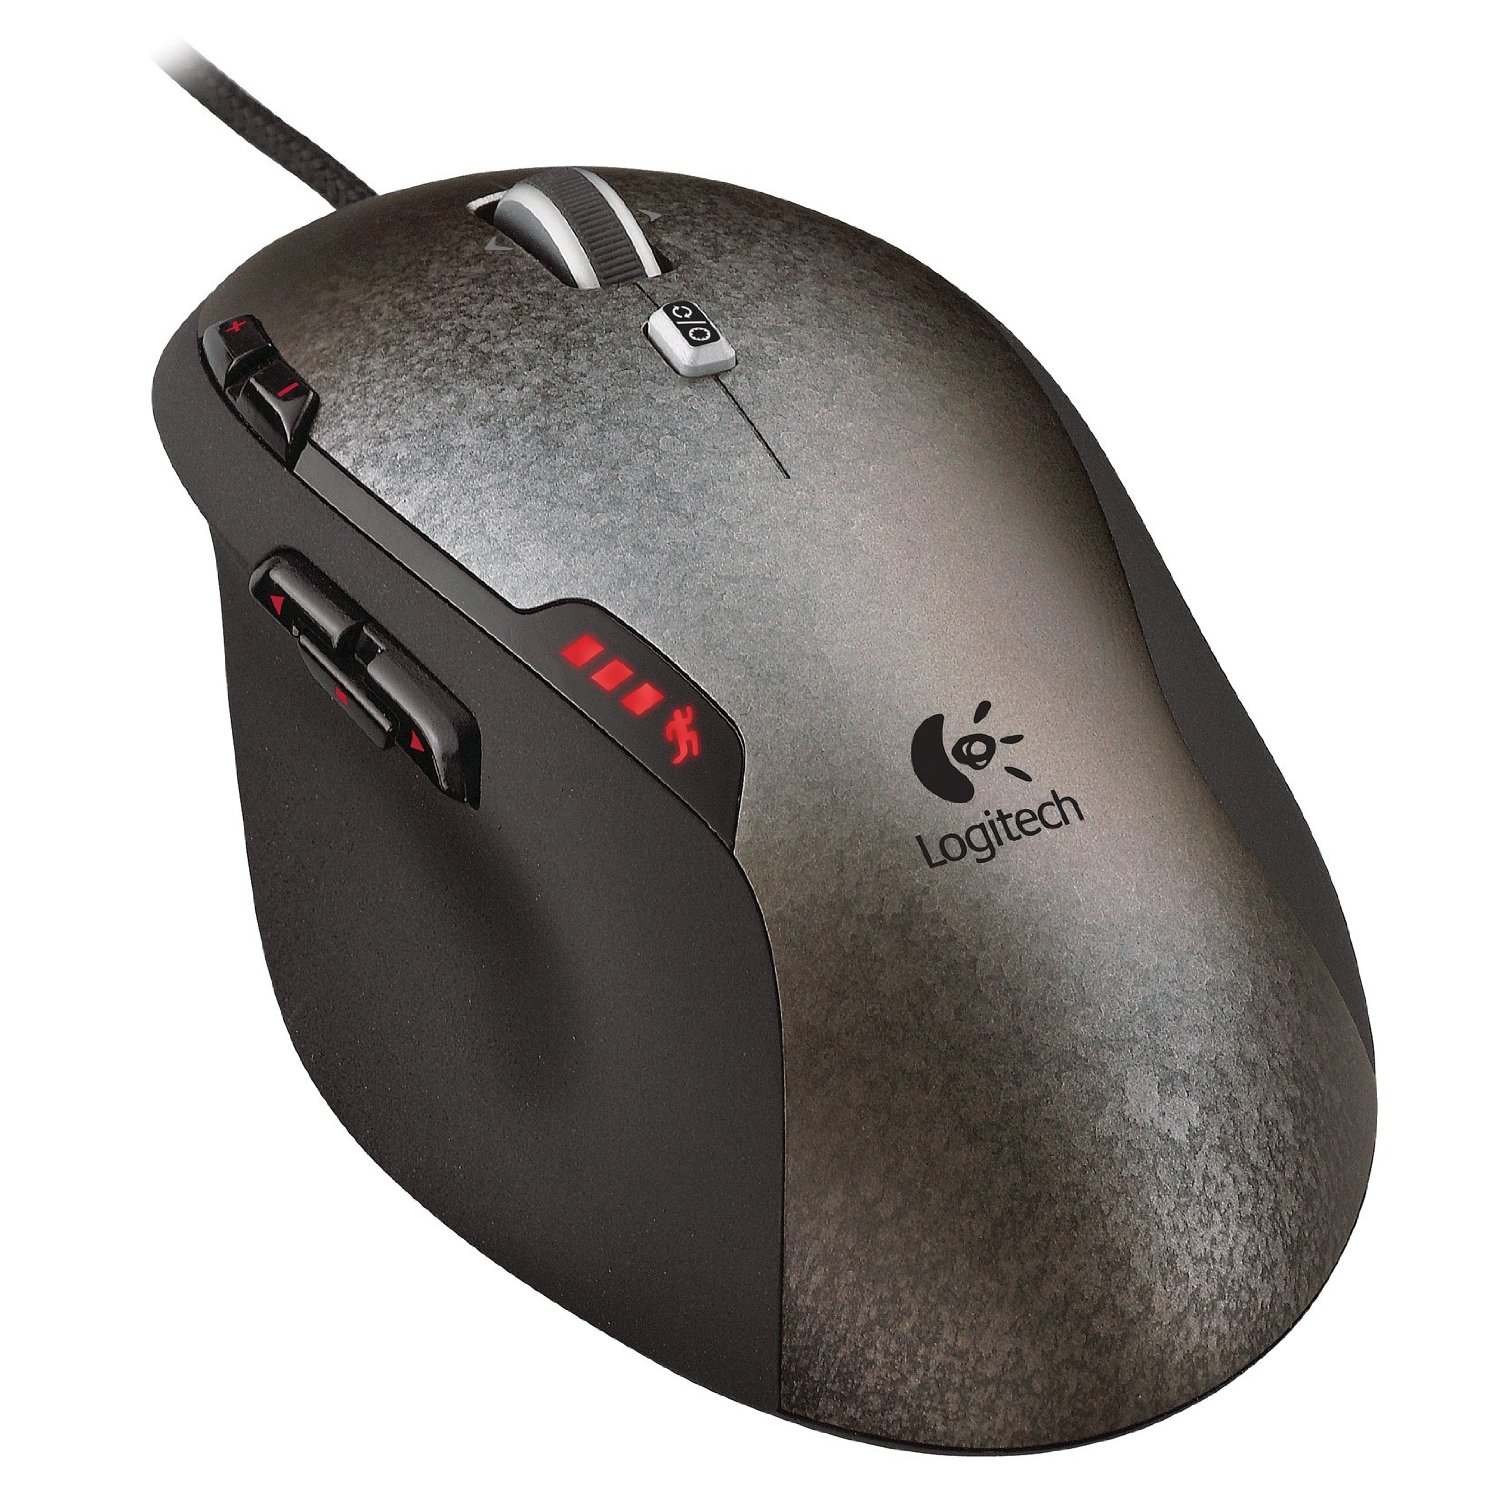 http://thetechjournal.com/wp-content/uploads/images/1110/1317524254-logitech-g500-programmable-gaming-mouse-1.jpg